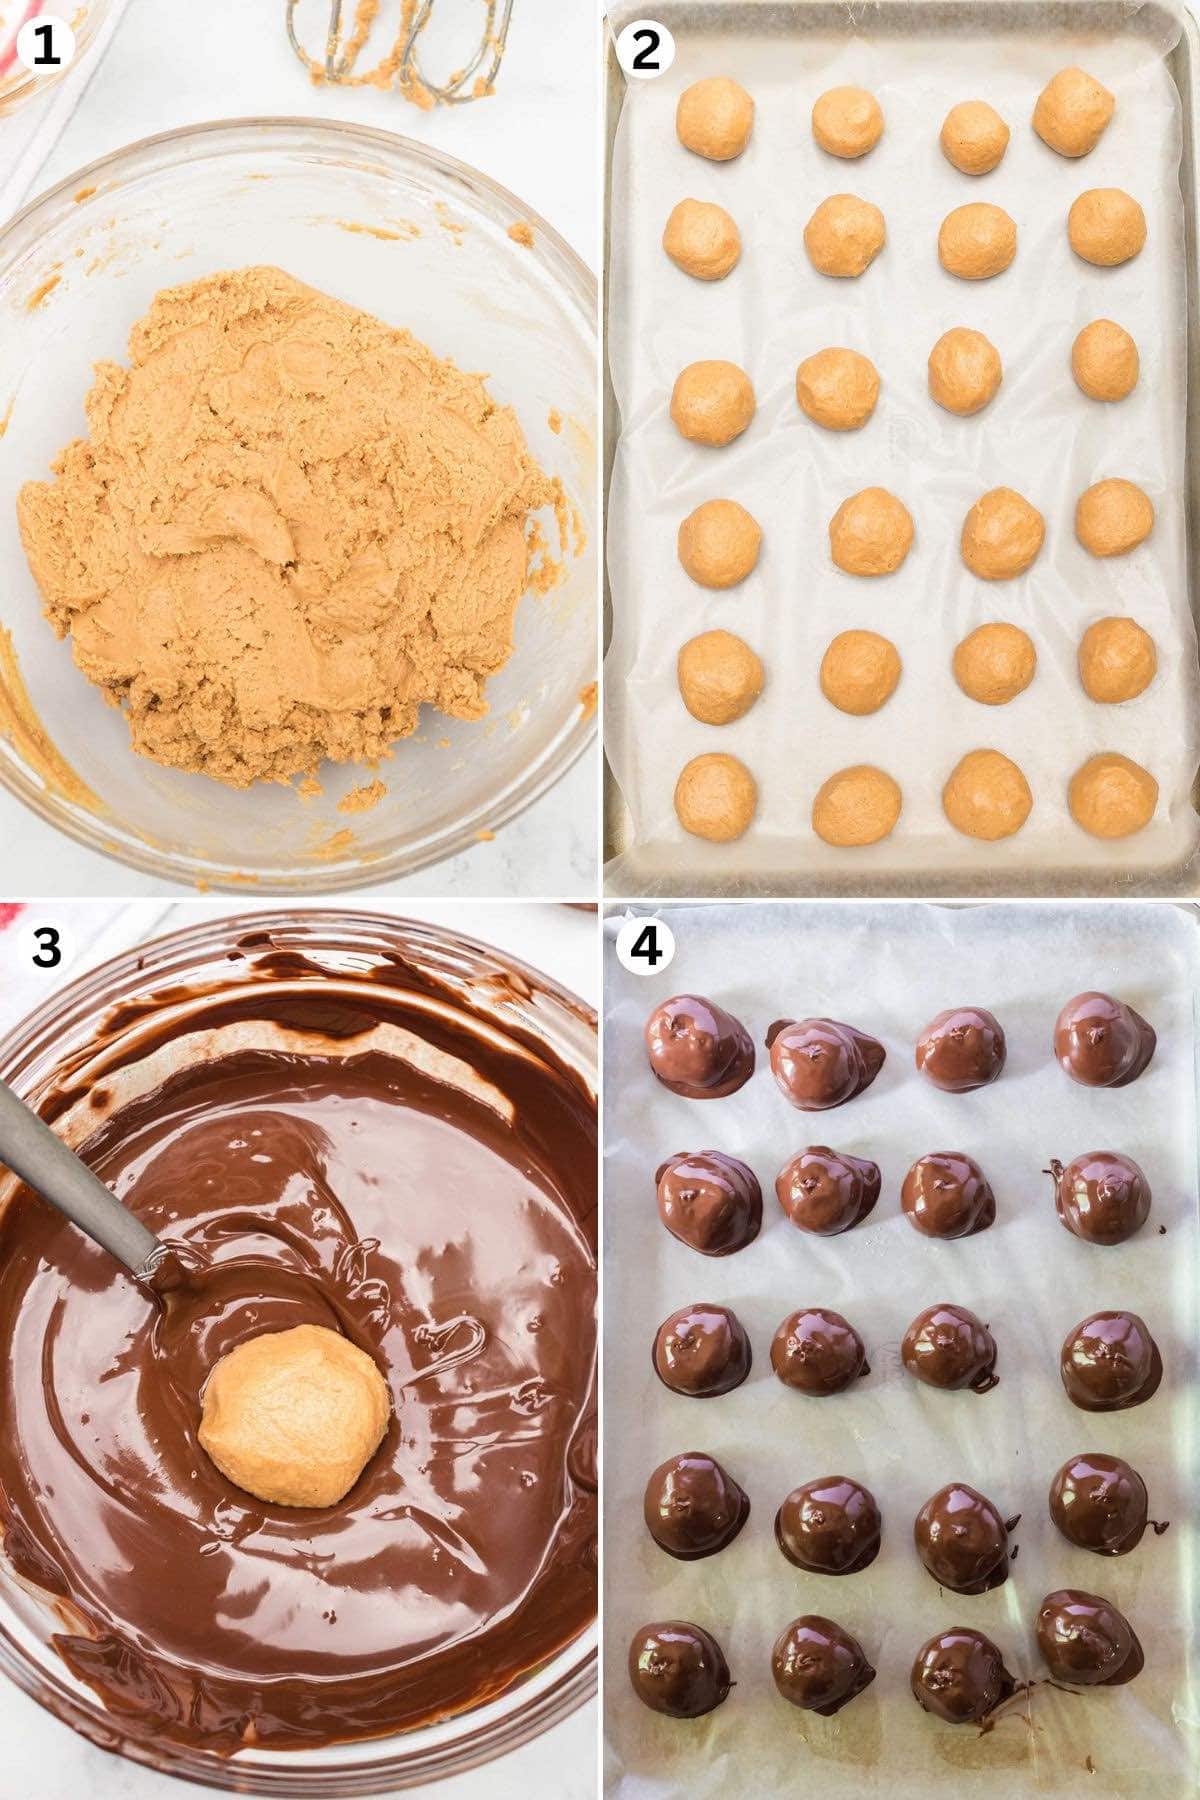 peanut butter mixture in a bowl. a couple of peanut butter balls lined in baking sheet. dip the balls in melted chocolate. lined up chocolate covered balls in baking sheet.